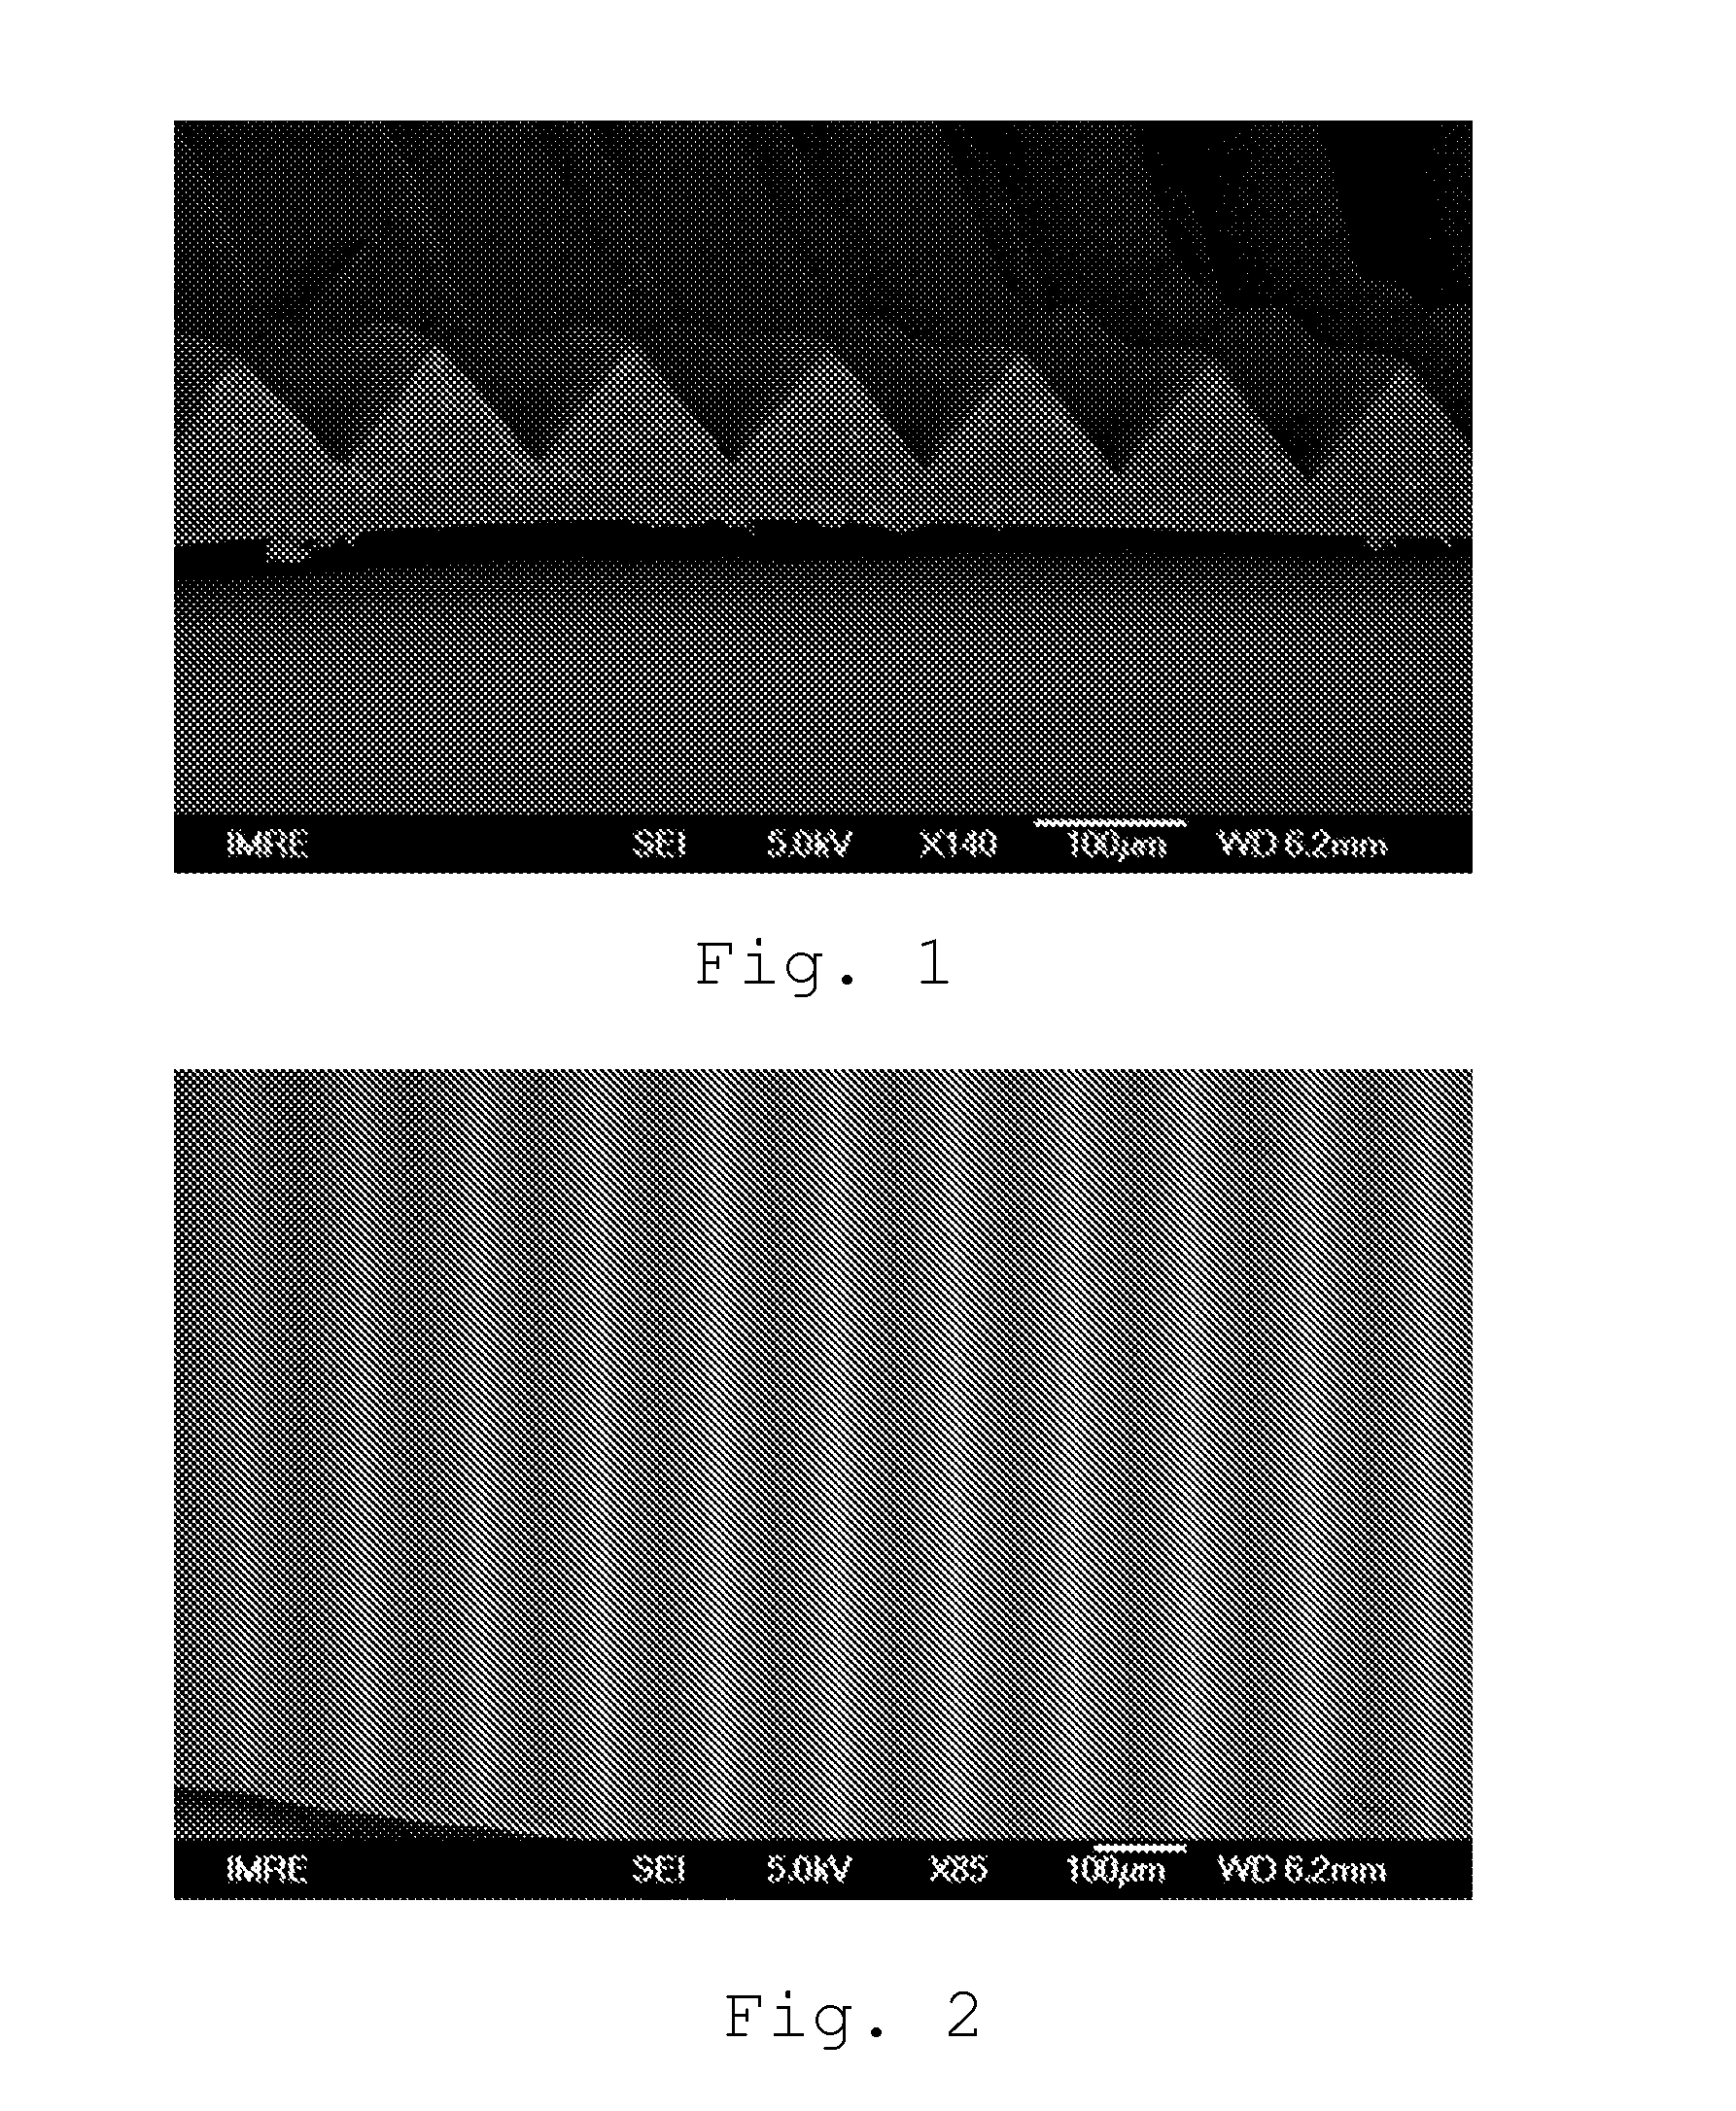 Water soluble pouch comprising an embossed area